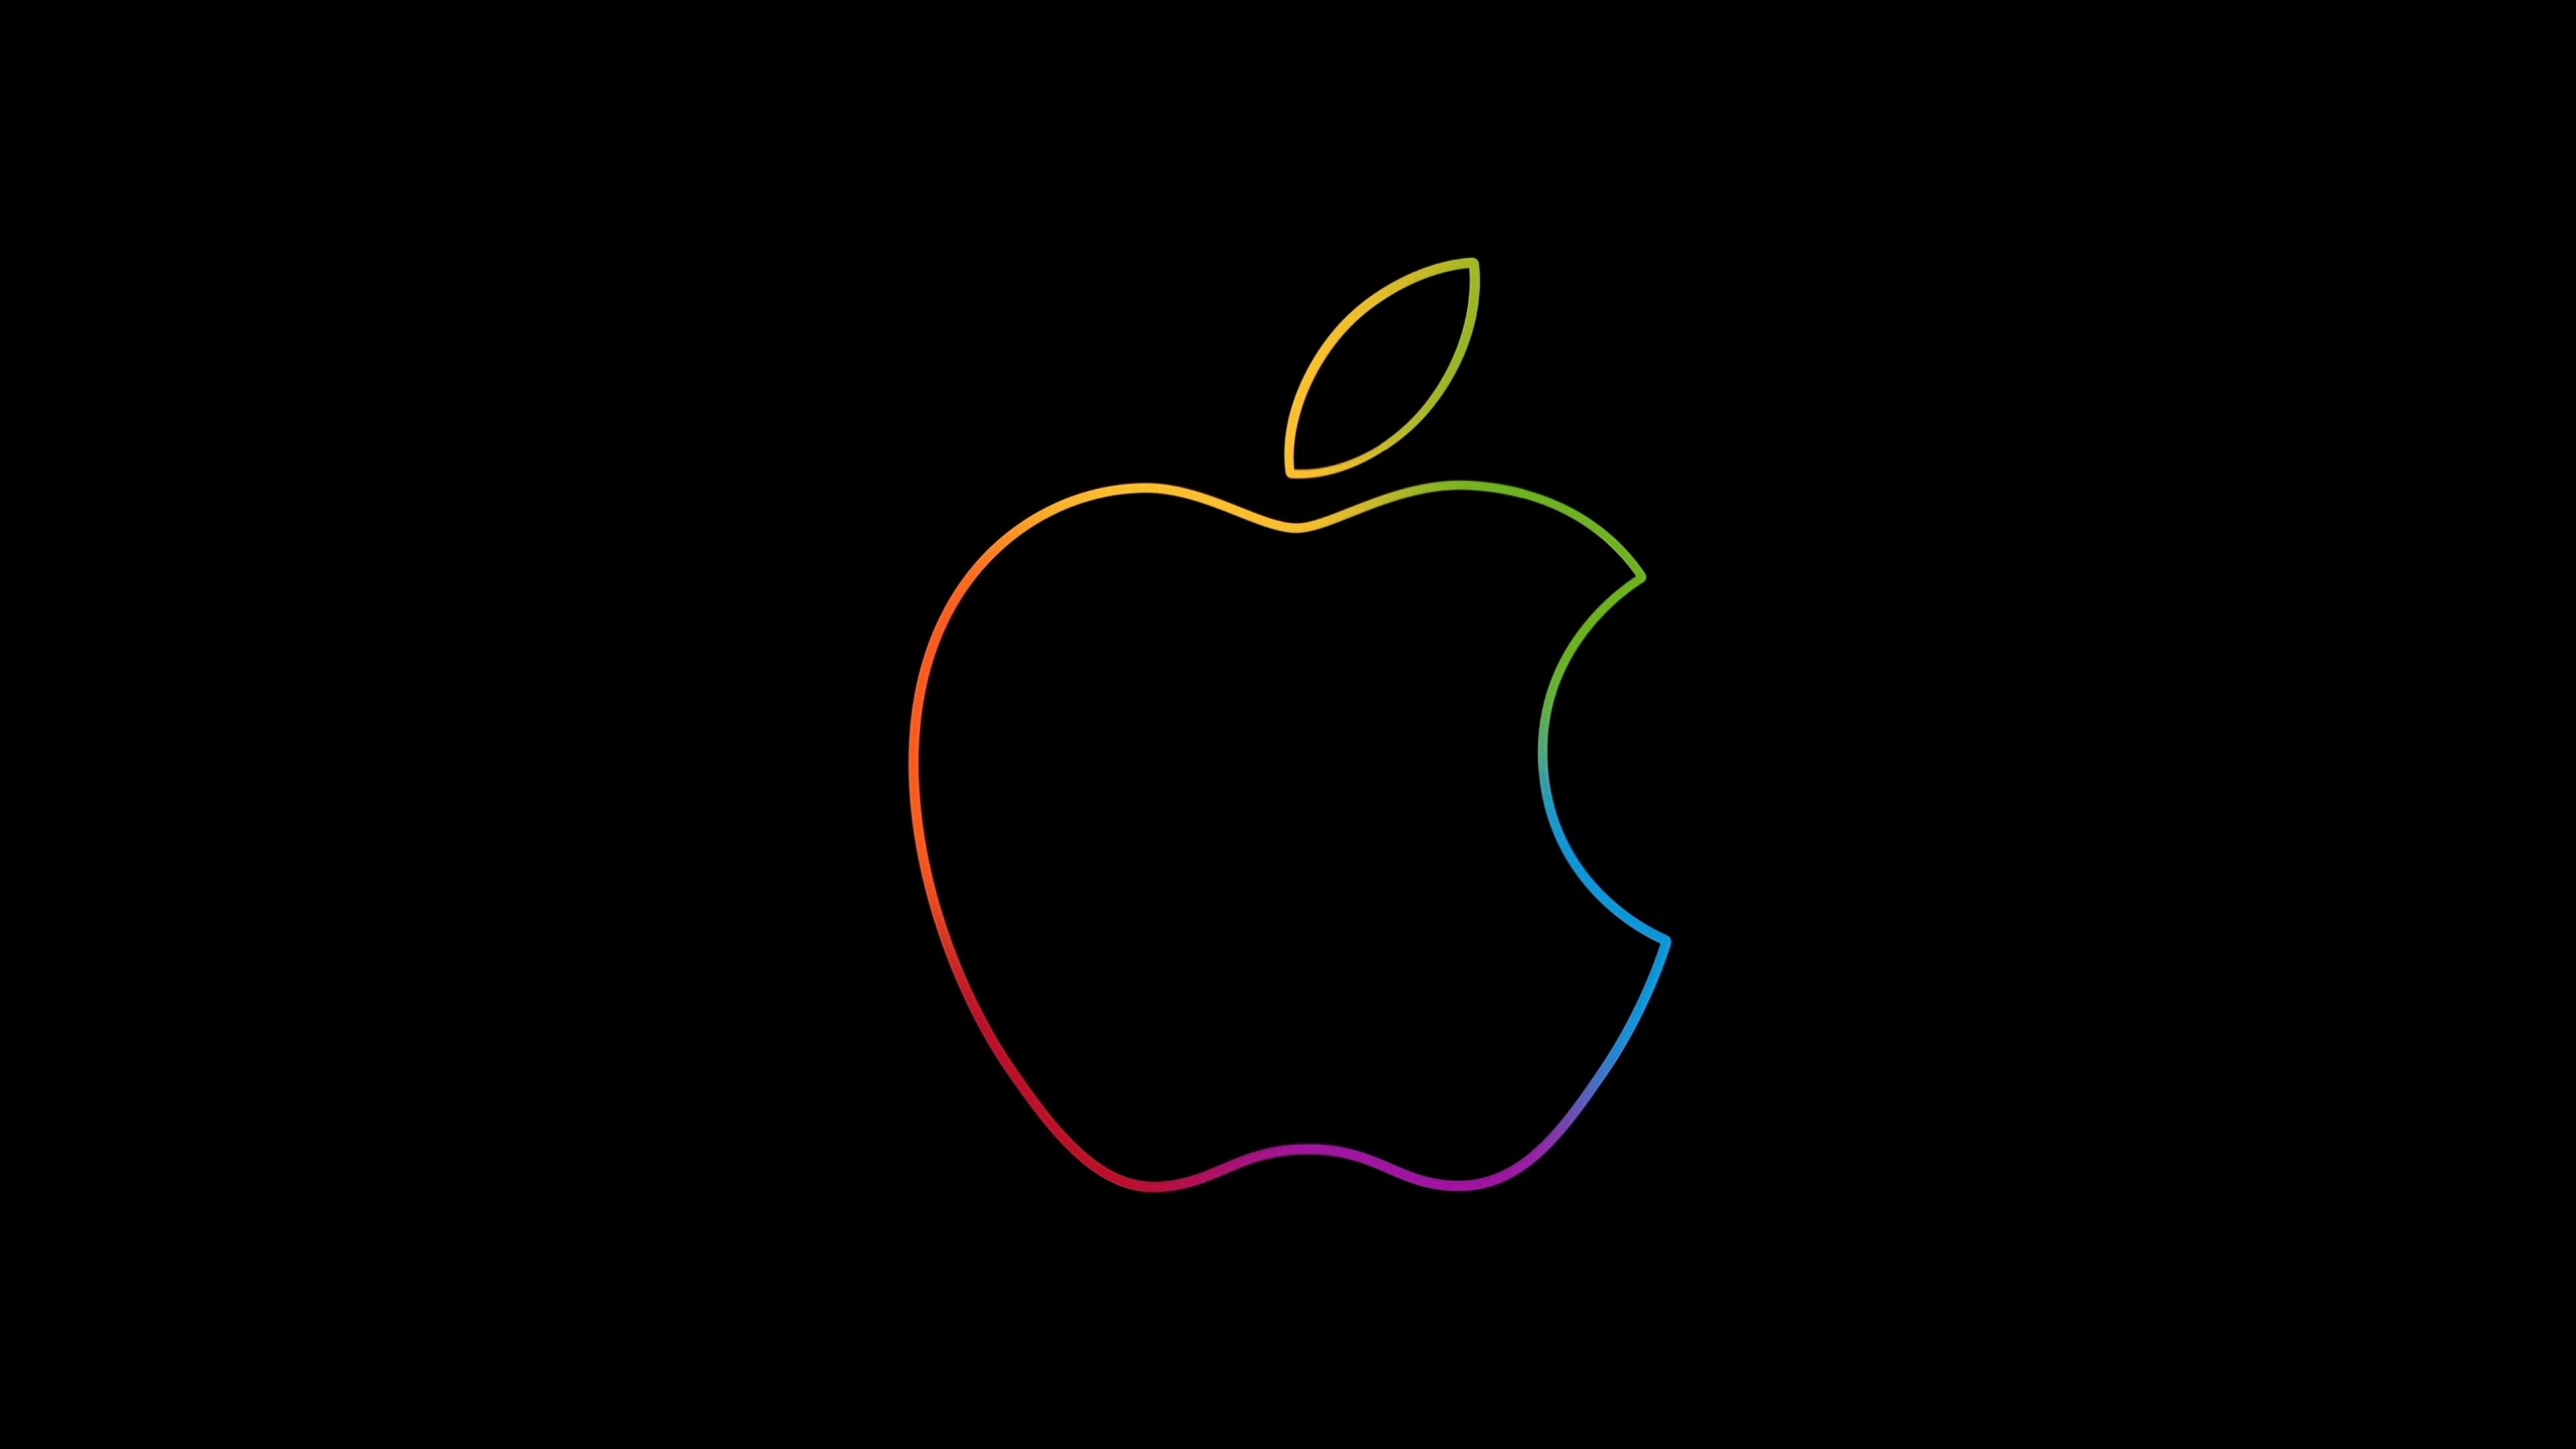 Download wallpaper: The famous Apple logo 3840x2160